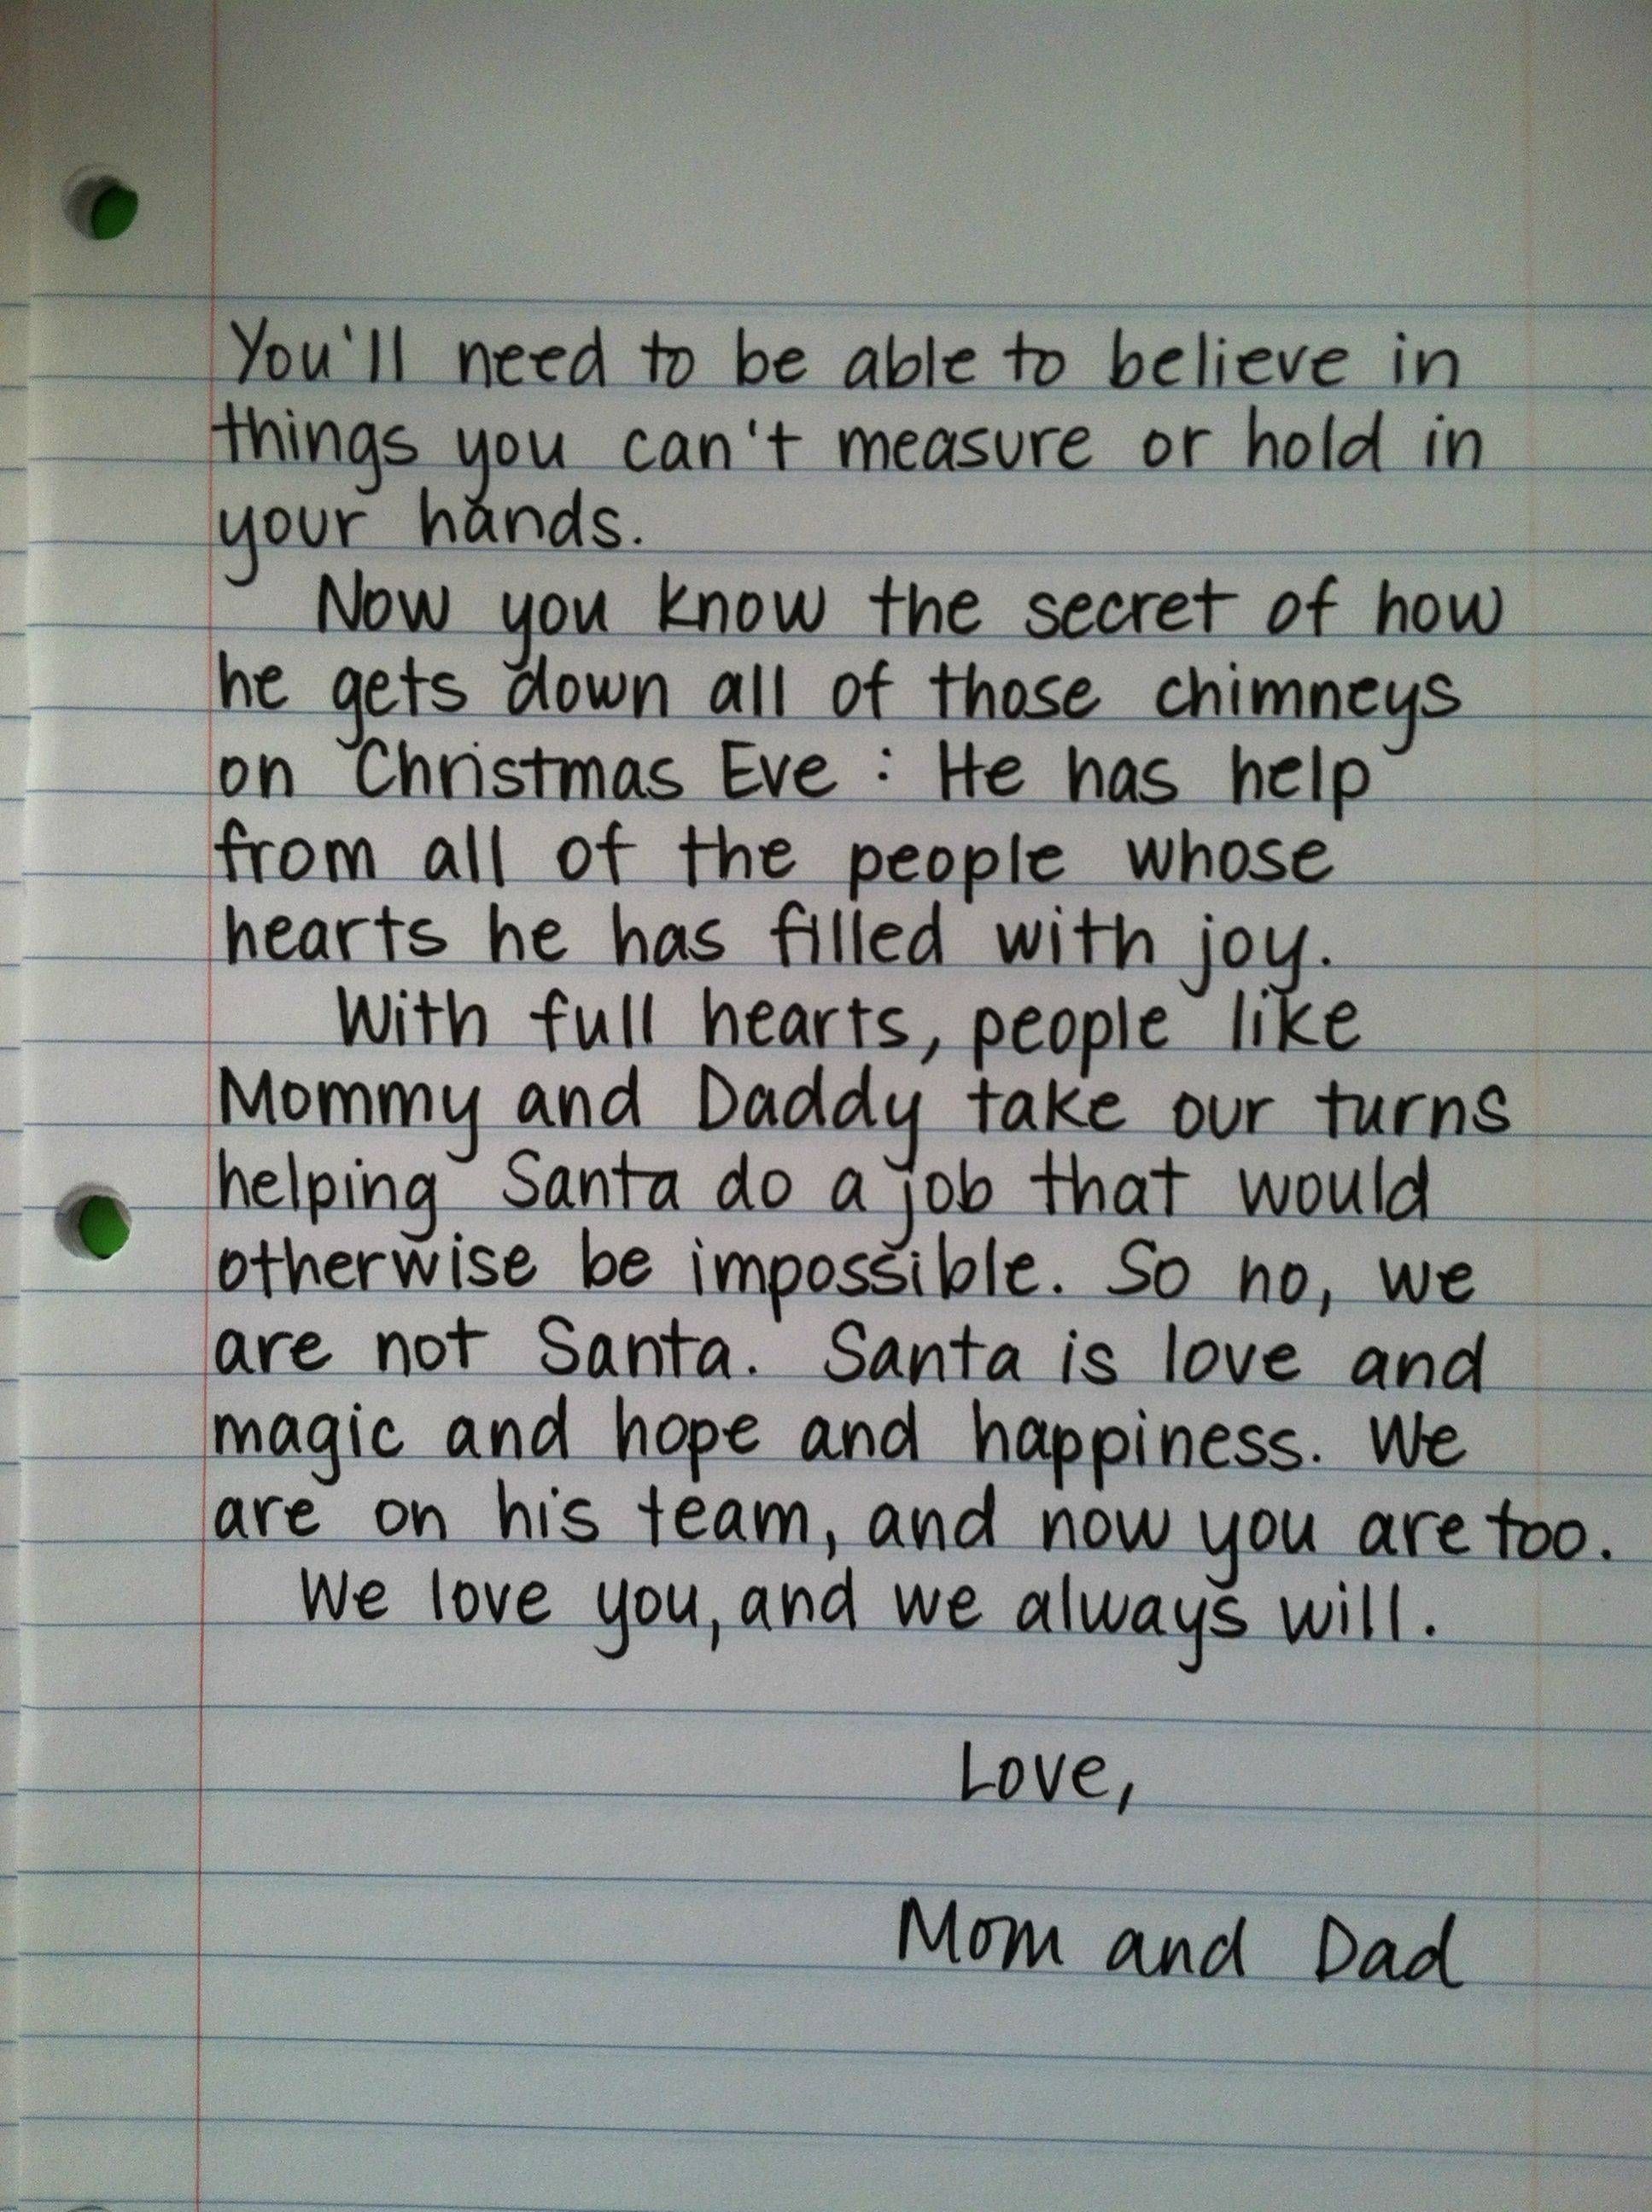 Santa Letter, for when the kids find out